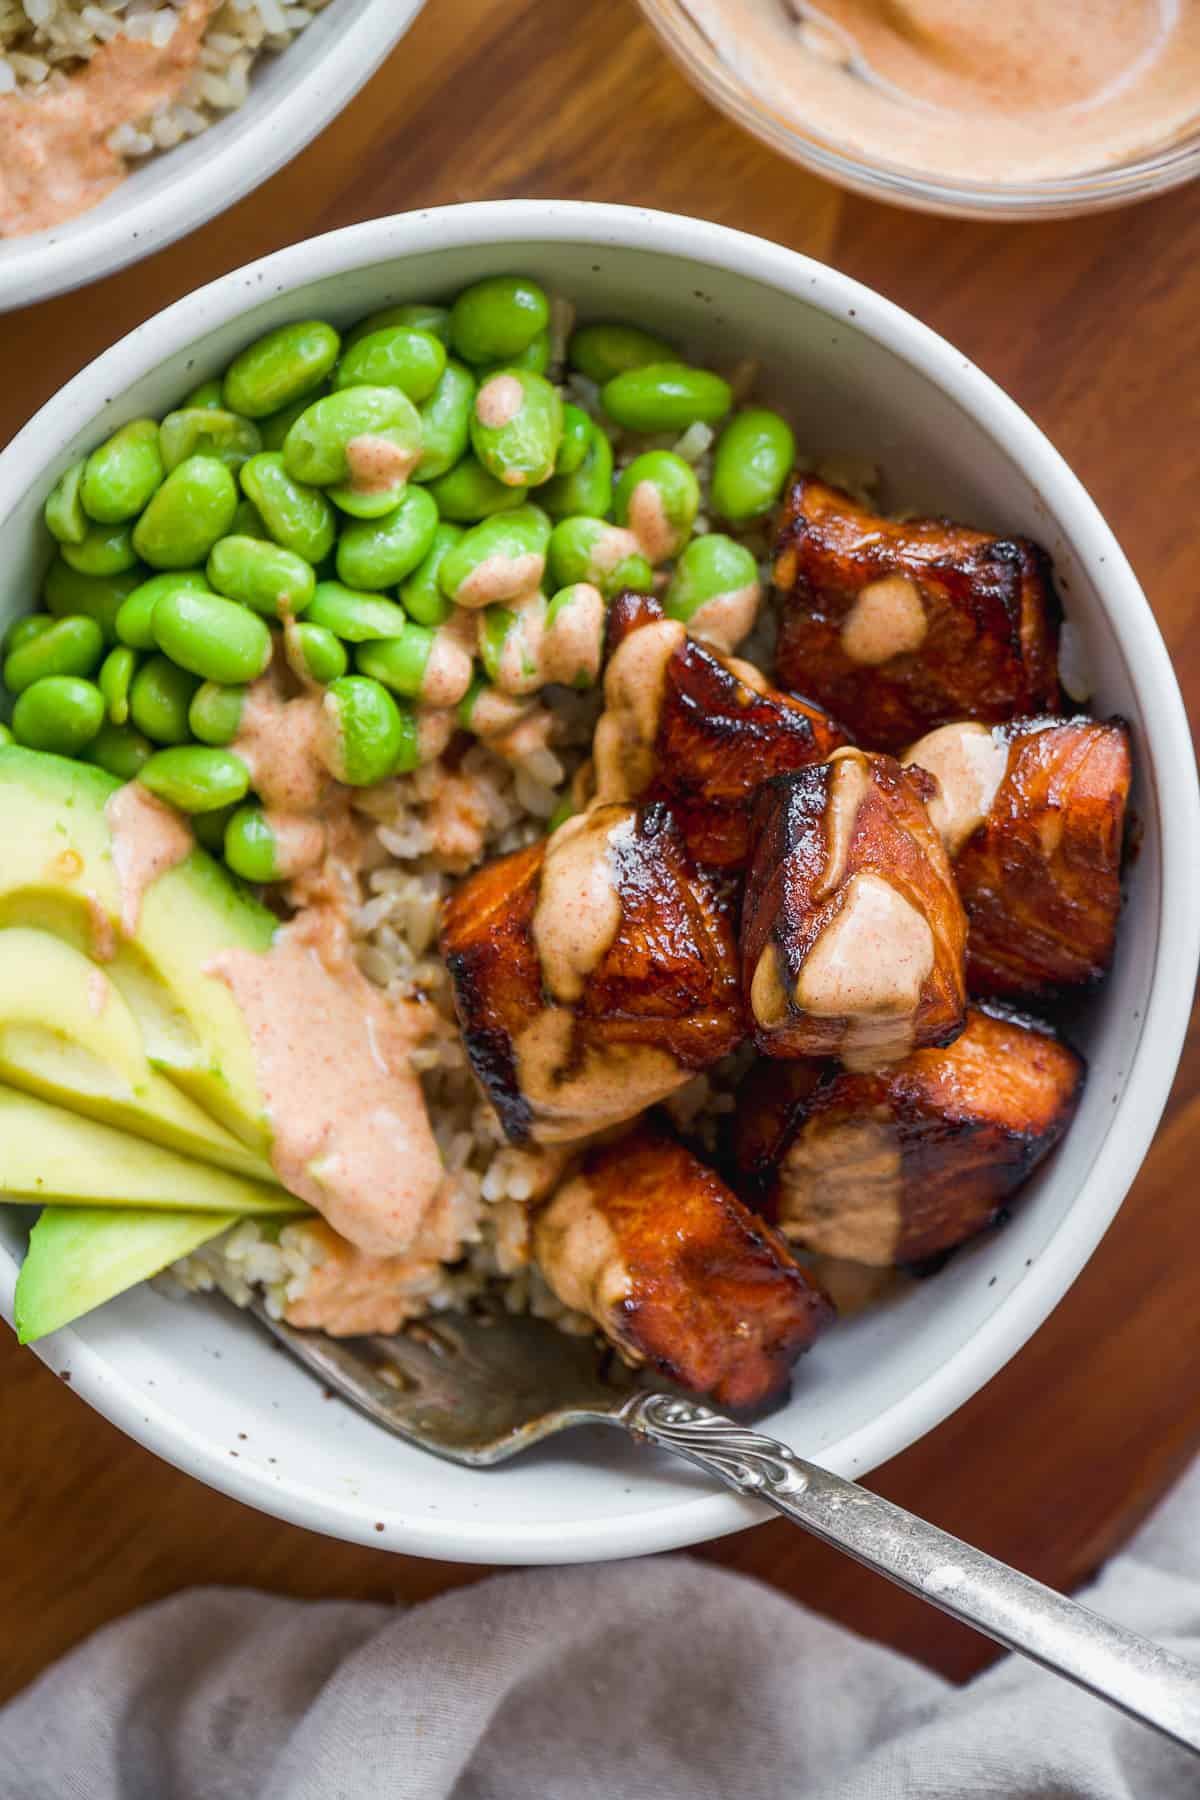 Teriyaki salmon bites in a bowl with brown rice, edamame, and avocado with orange sauce on top.